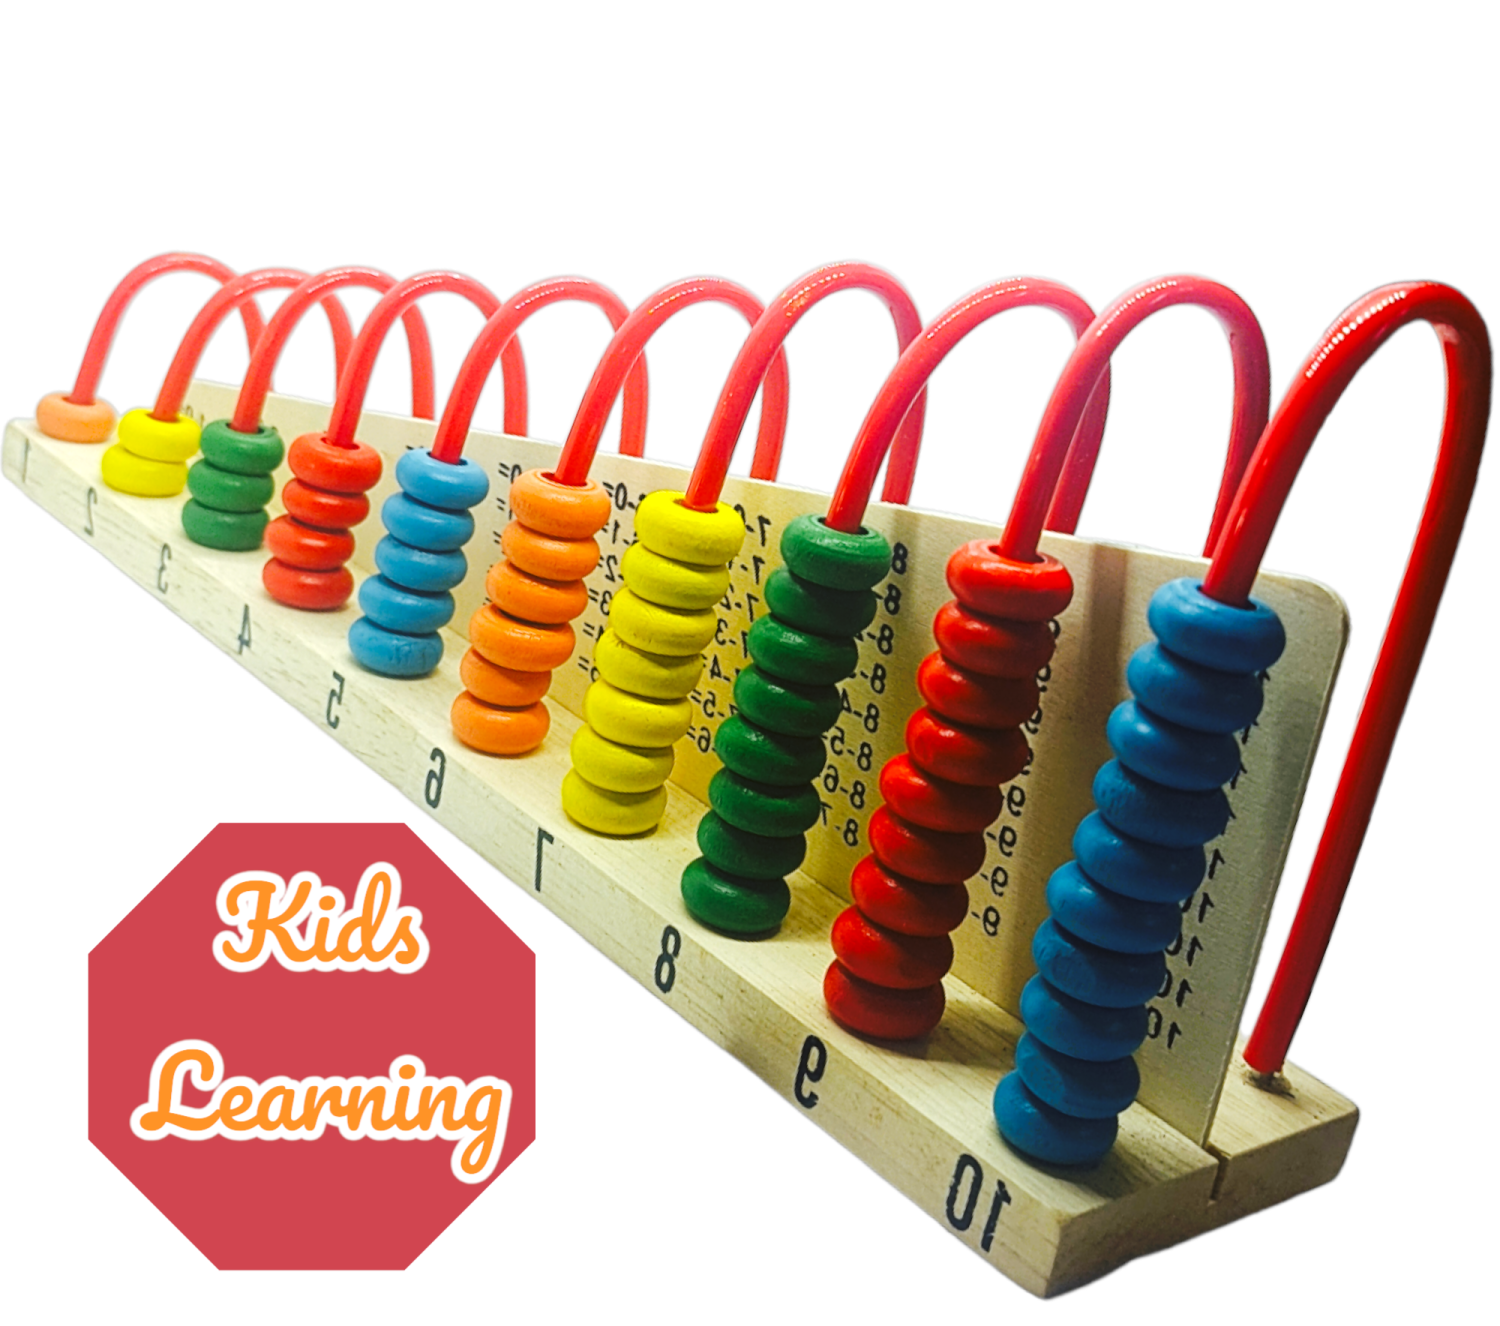 P&S Wooden Abacus Counting, Addition, Subtraction, and Math’s Learning Early Educational Kit Toy for Children Ages 3 and Up (Calculation Shelf)